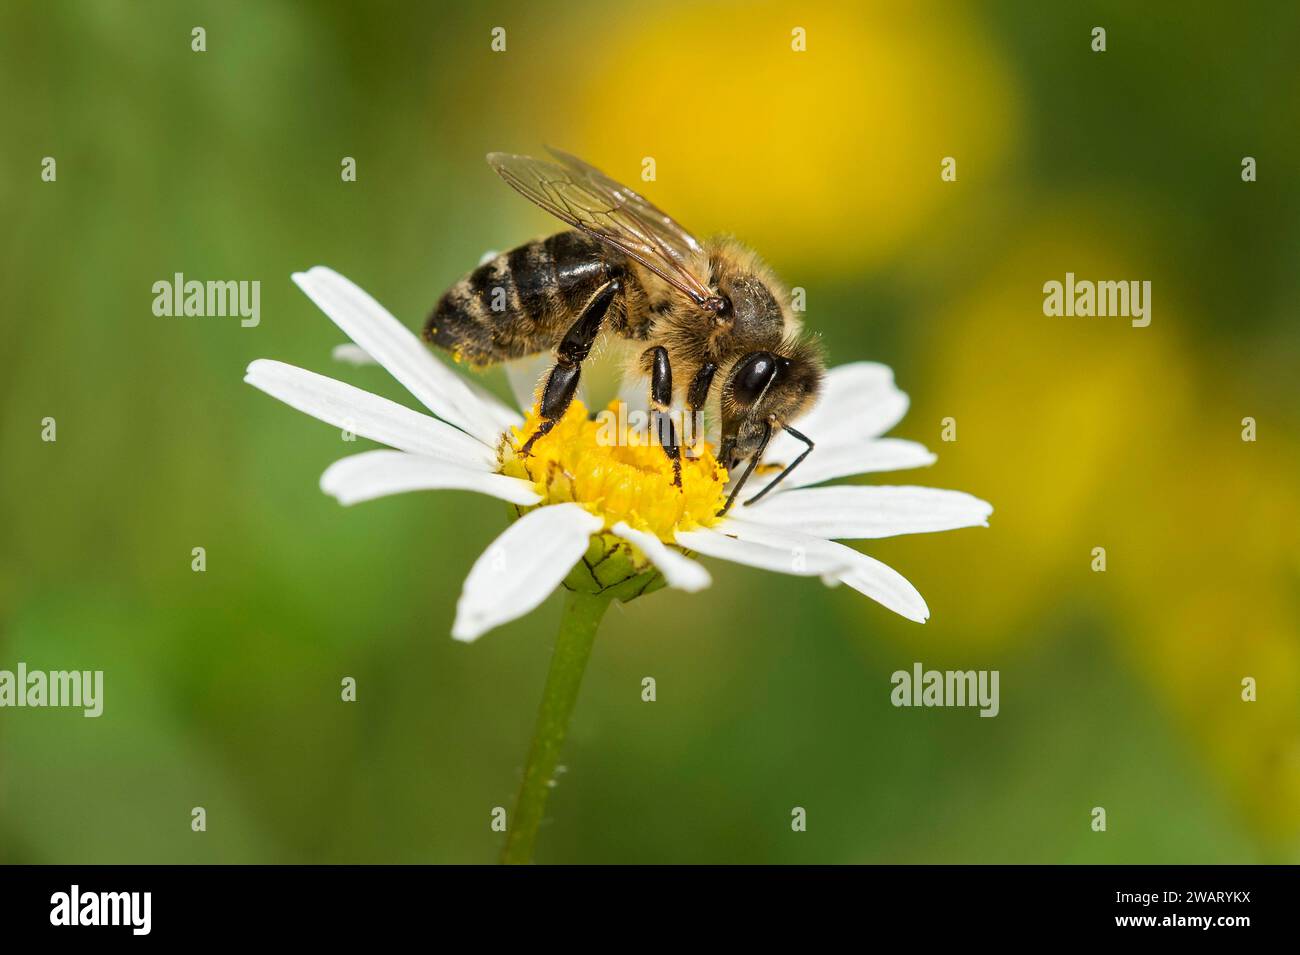 Worker of western honey bee (Apis mellifera) collecting nectar on a meadow daisy, Valais, Switzerland Stock Photo